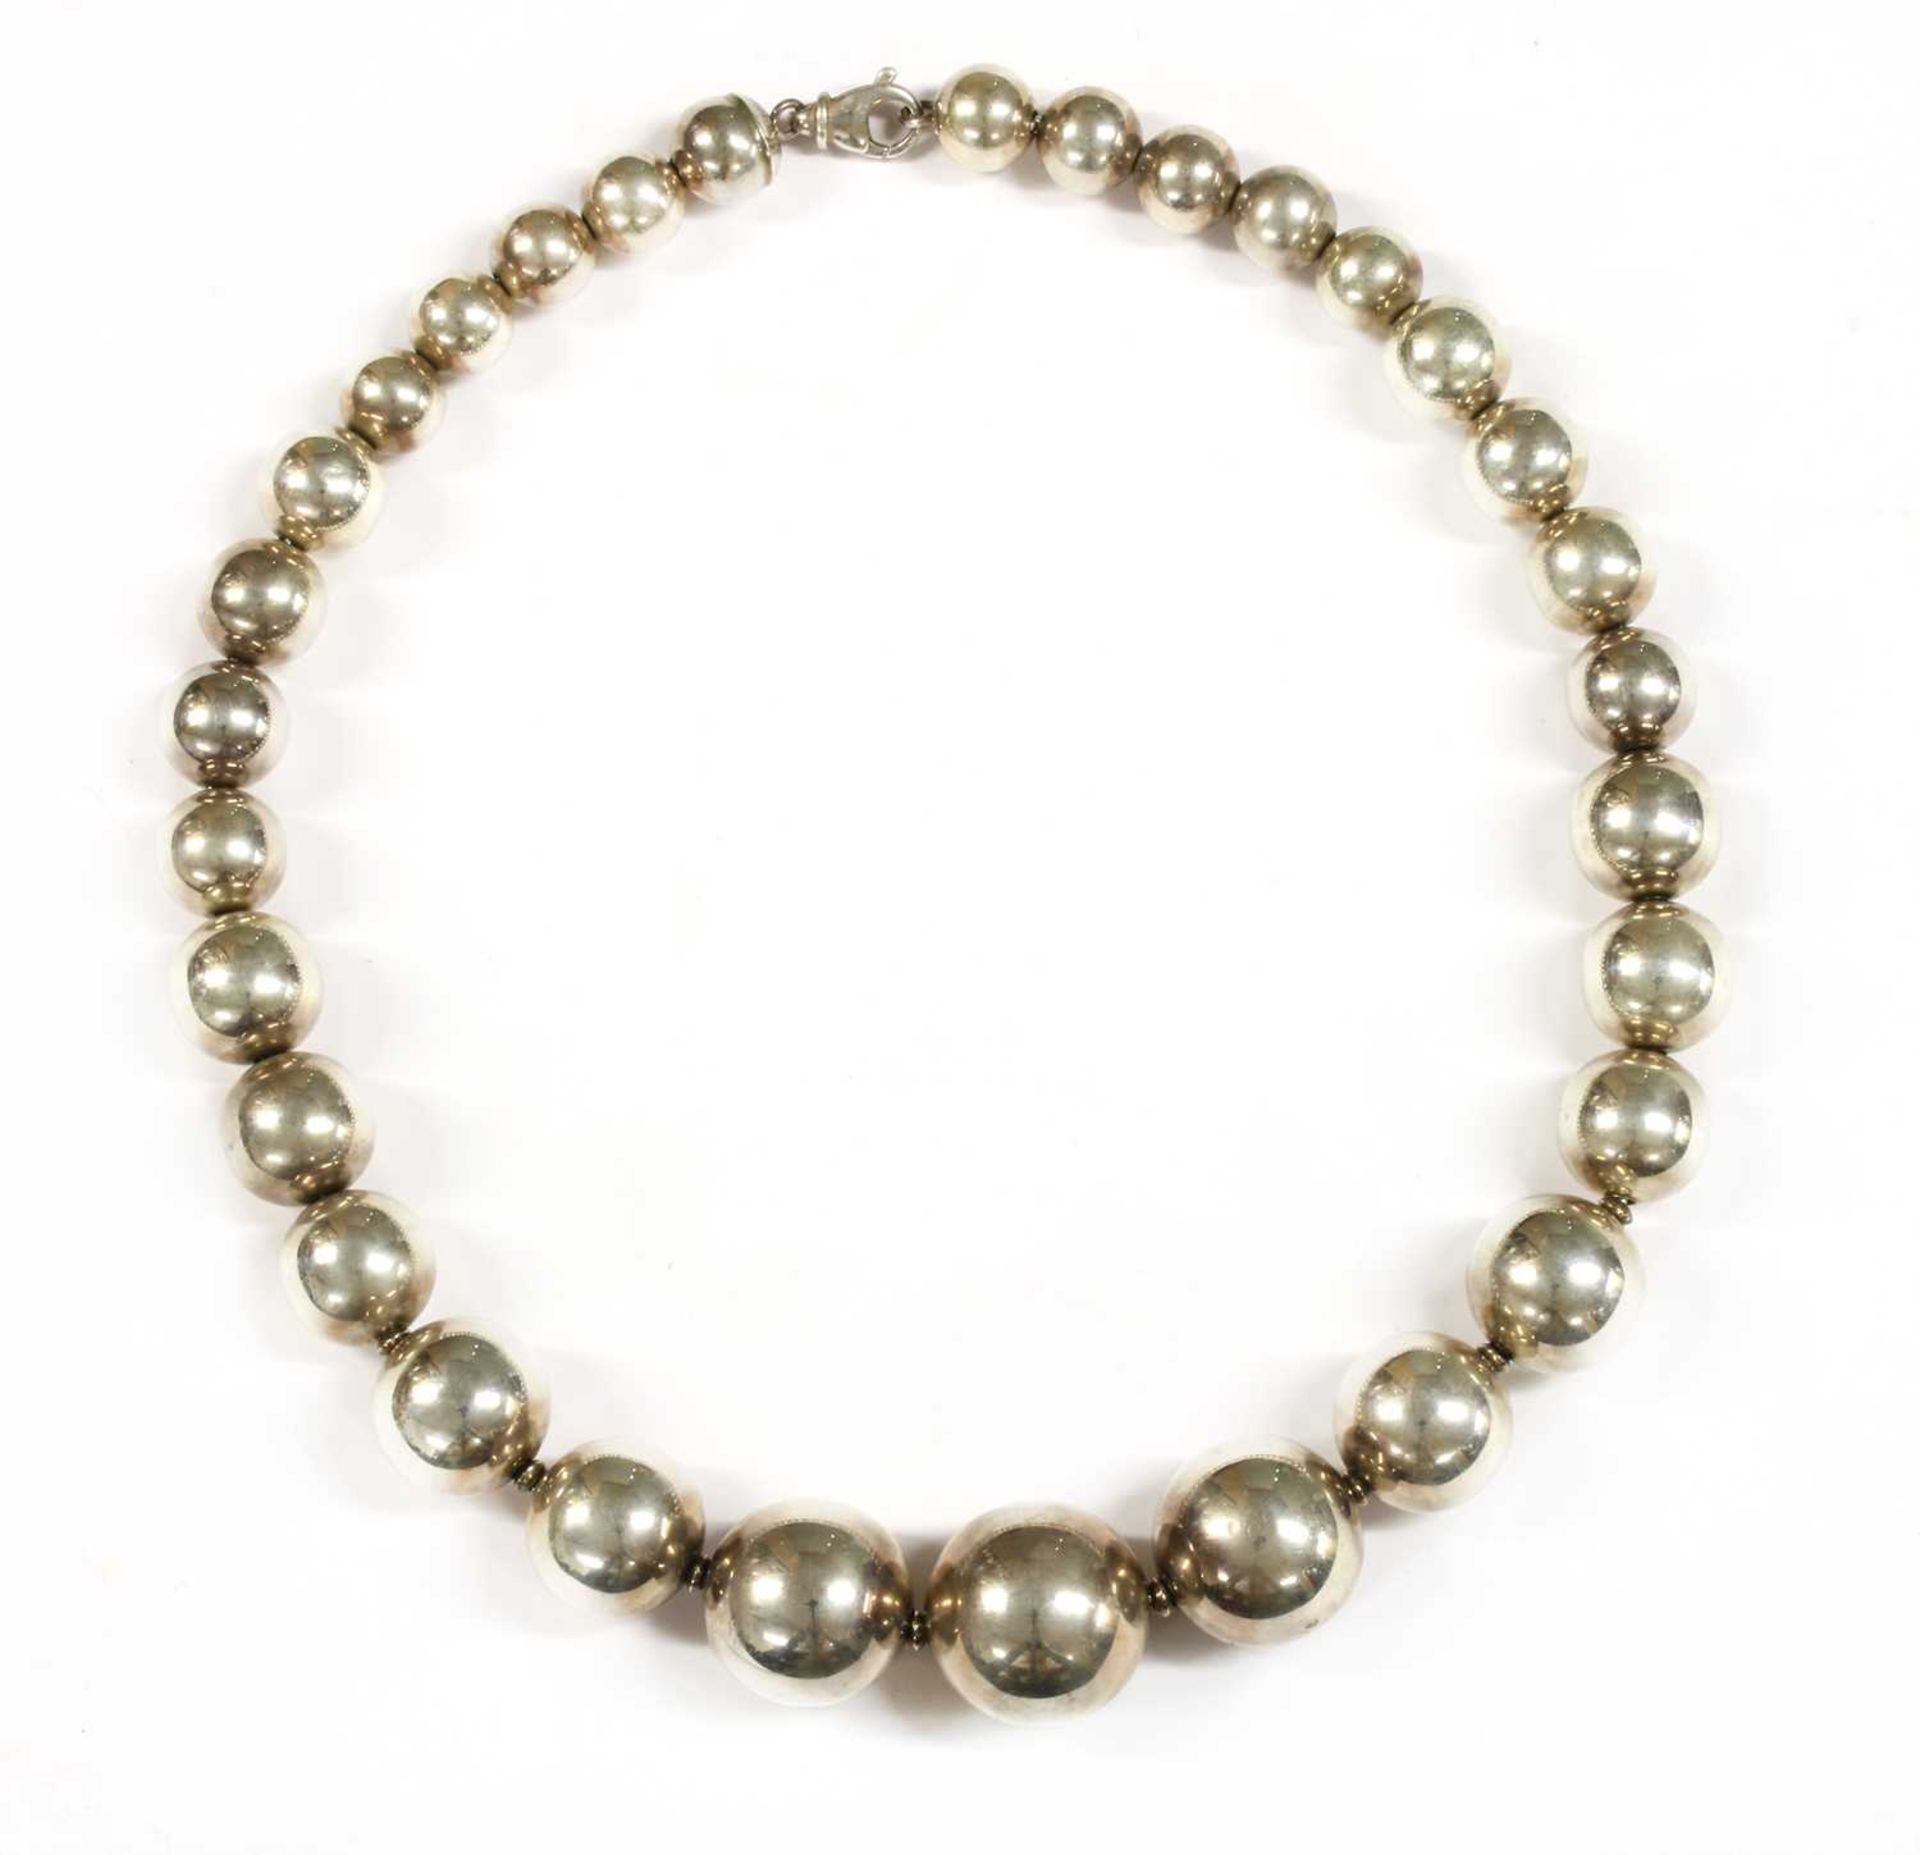 An Italian sterling silver single row graduated bead necklace, by Old Florence,